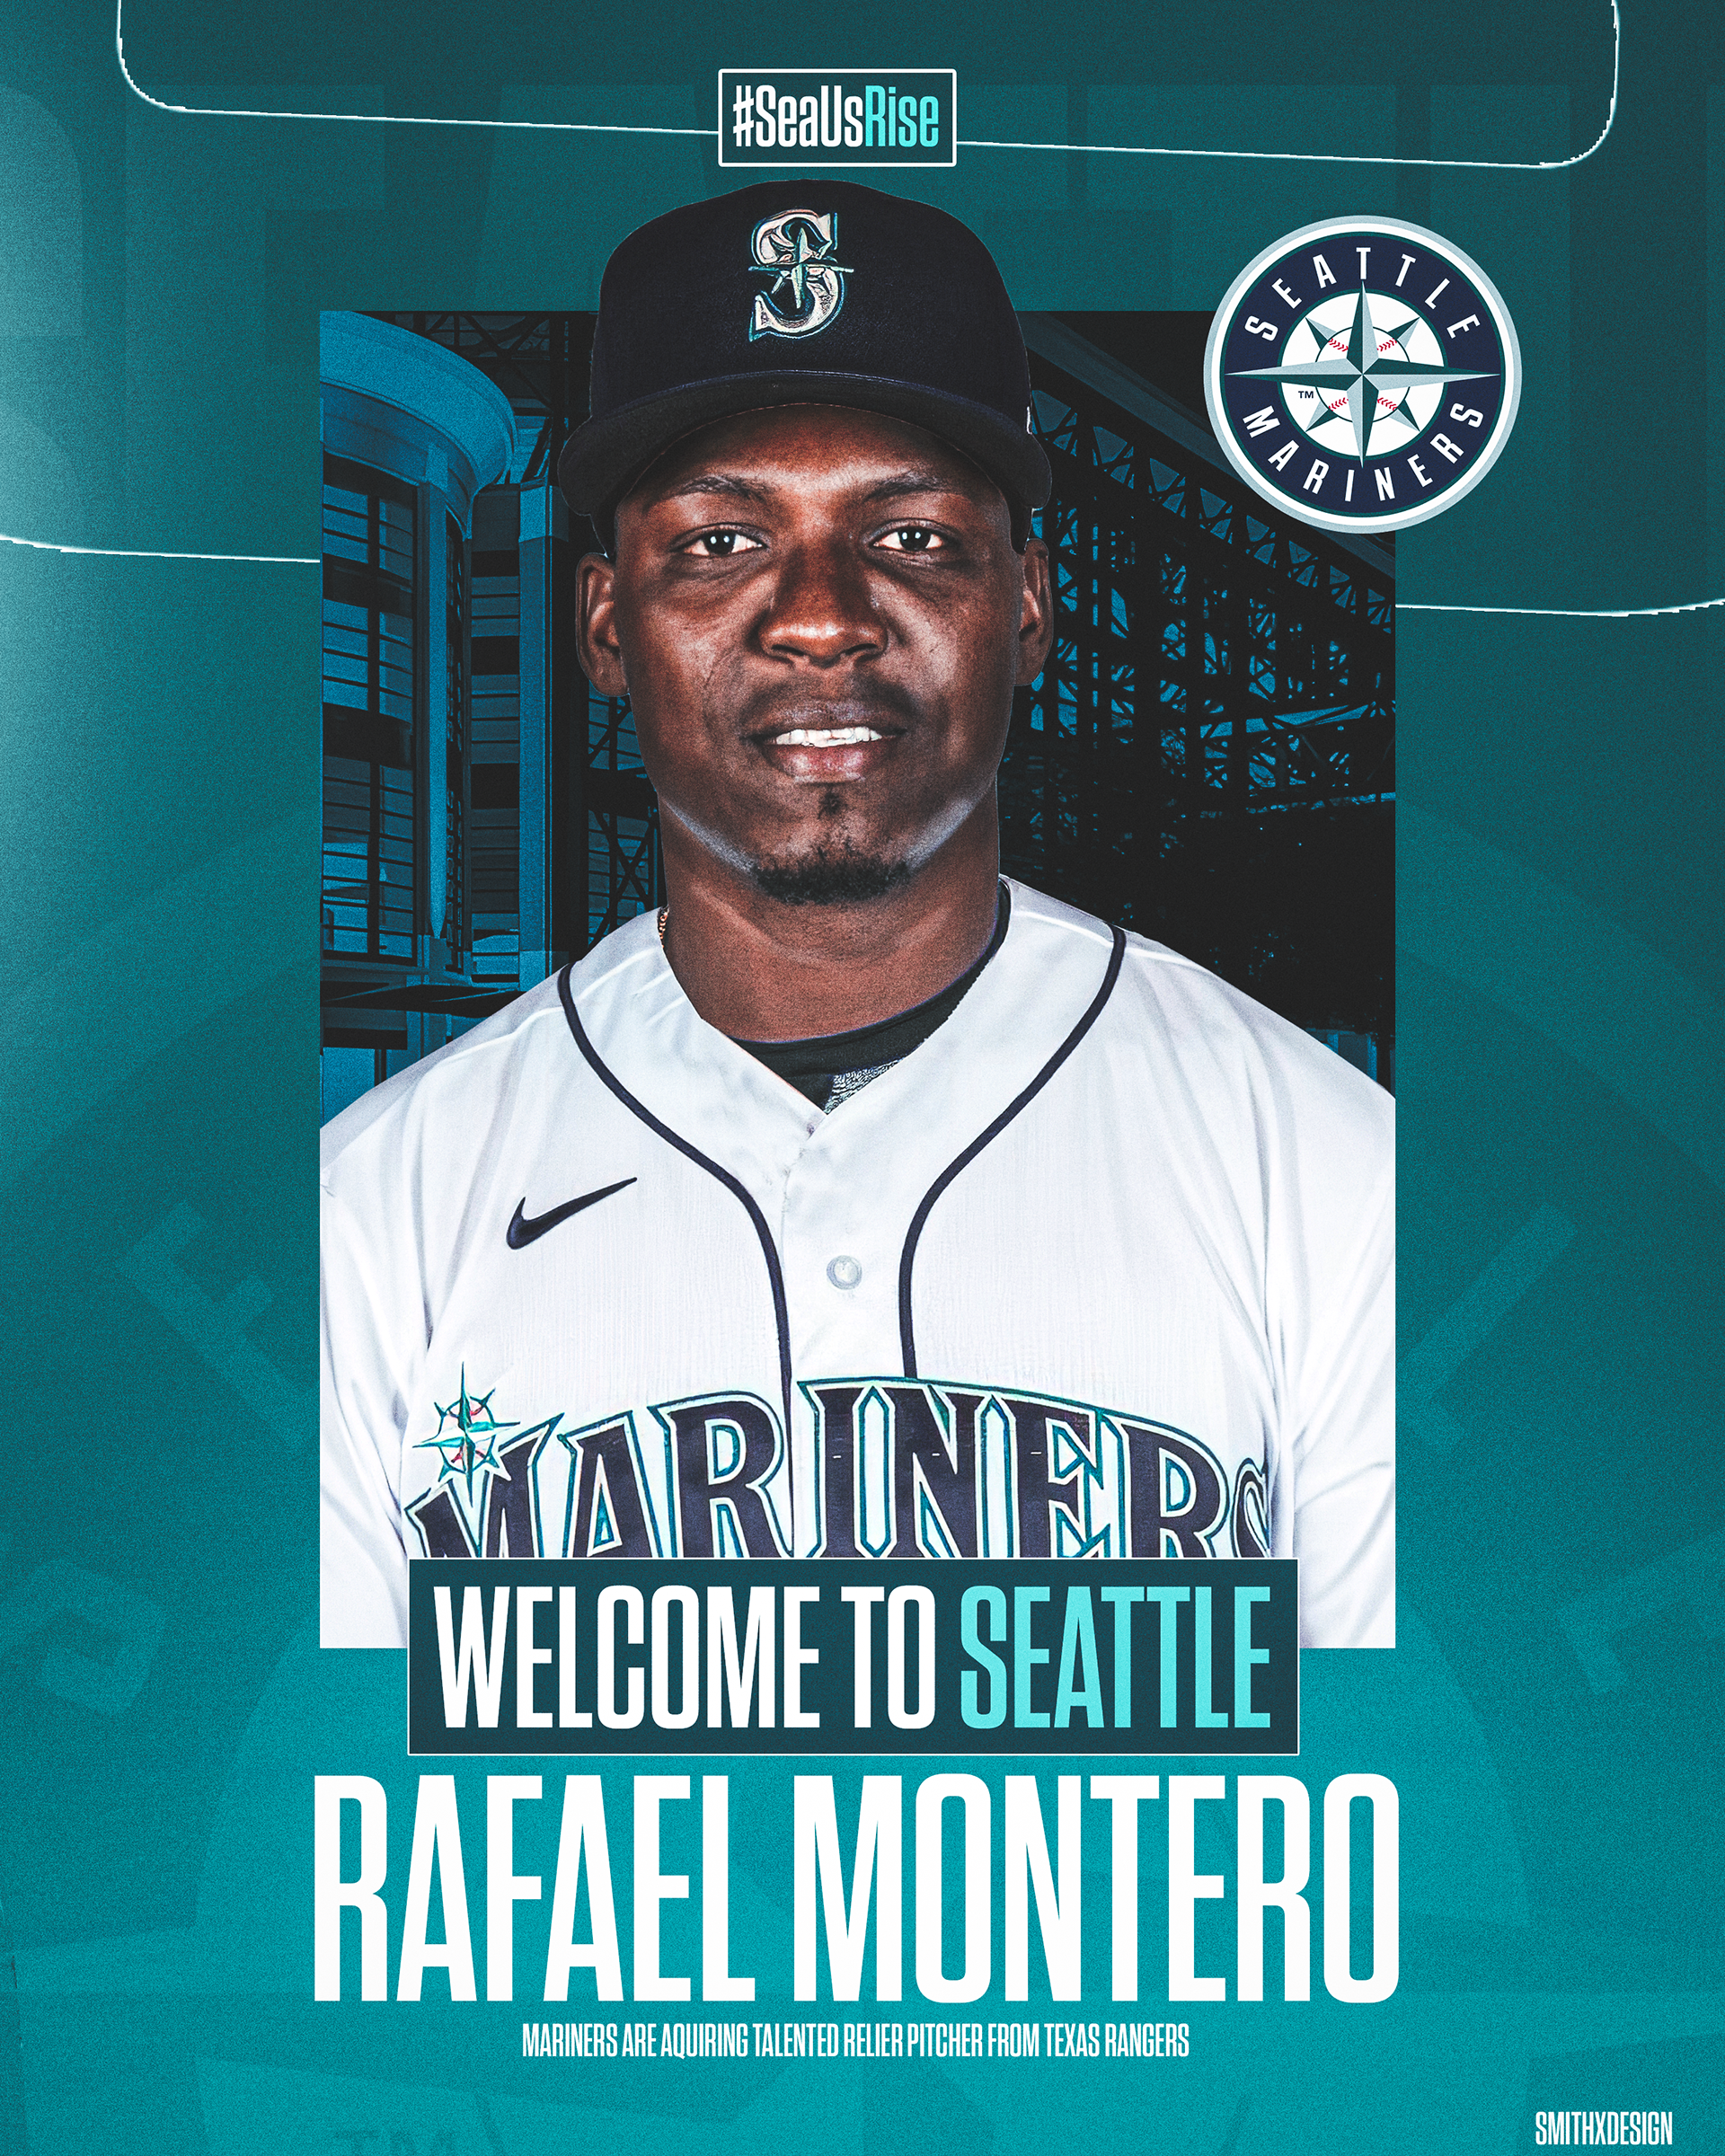 UNOFFICiAL ATHLETIC  Seattle Mariners Rebrand